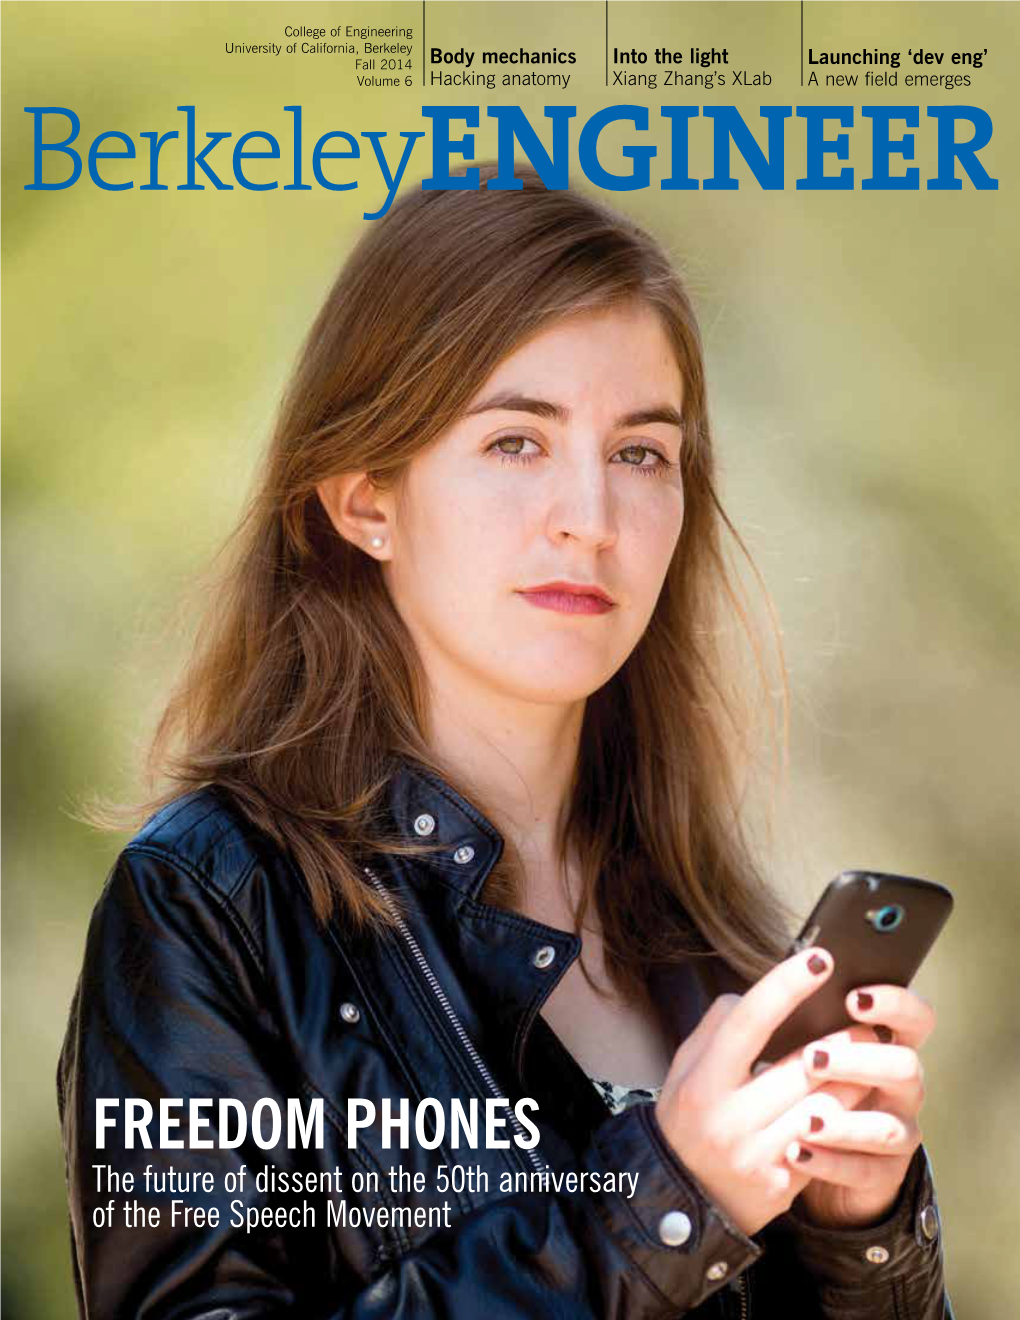 Freedom Phones the Future of Dissent on the 50Th Anniversary of the Free Speech Movement Dean’Sword